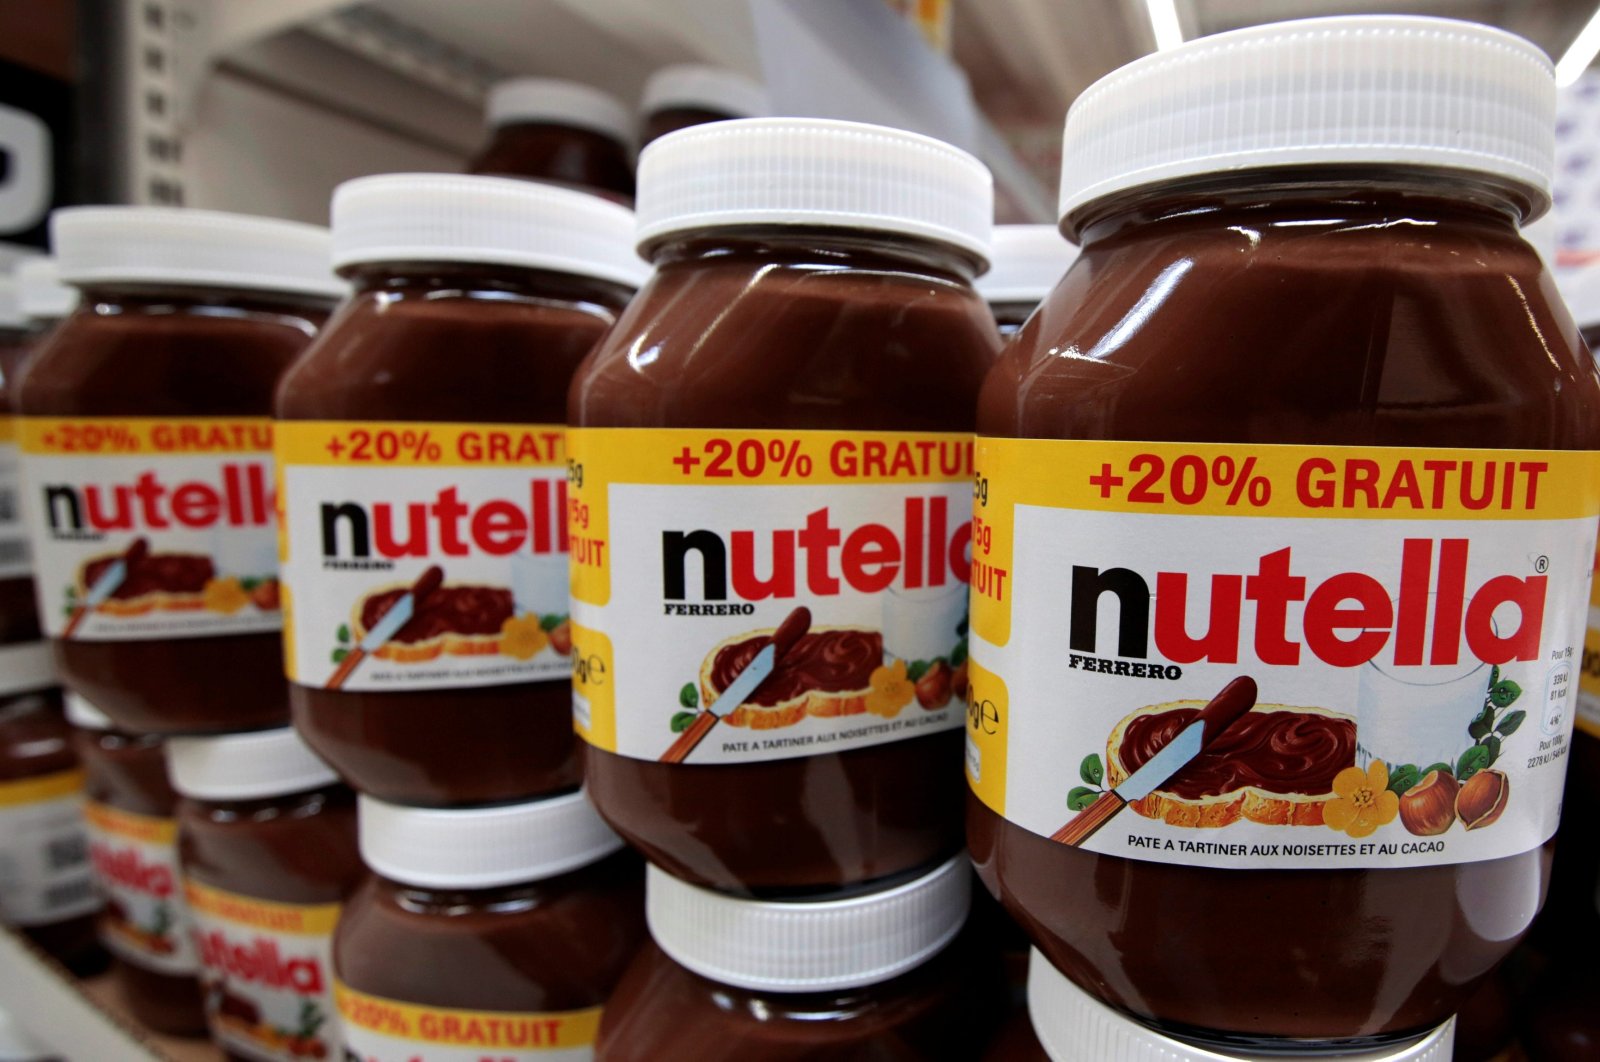 Jars of Nutella chocolate-hazelnut paste are displayed at a Carrefour hypermarket in Nice, France, April 6, 2016. (Reuters Photo)